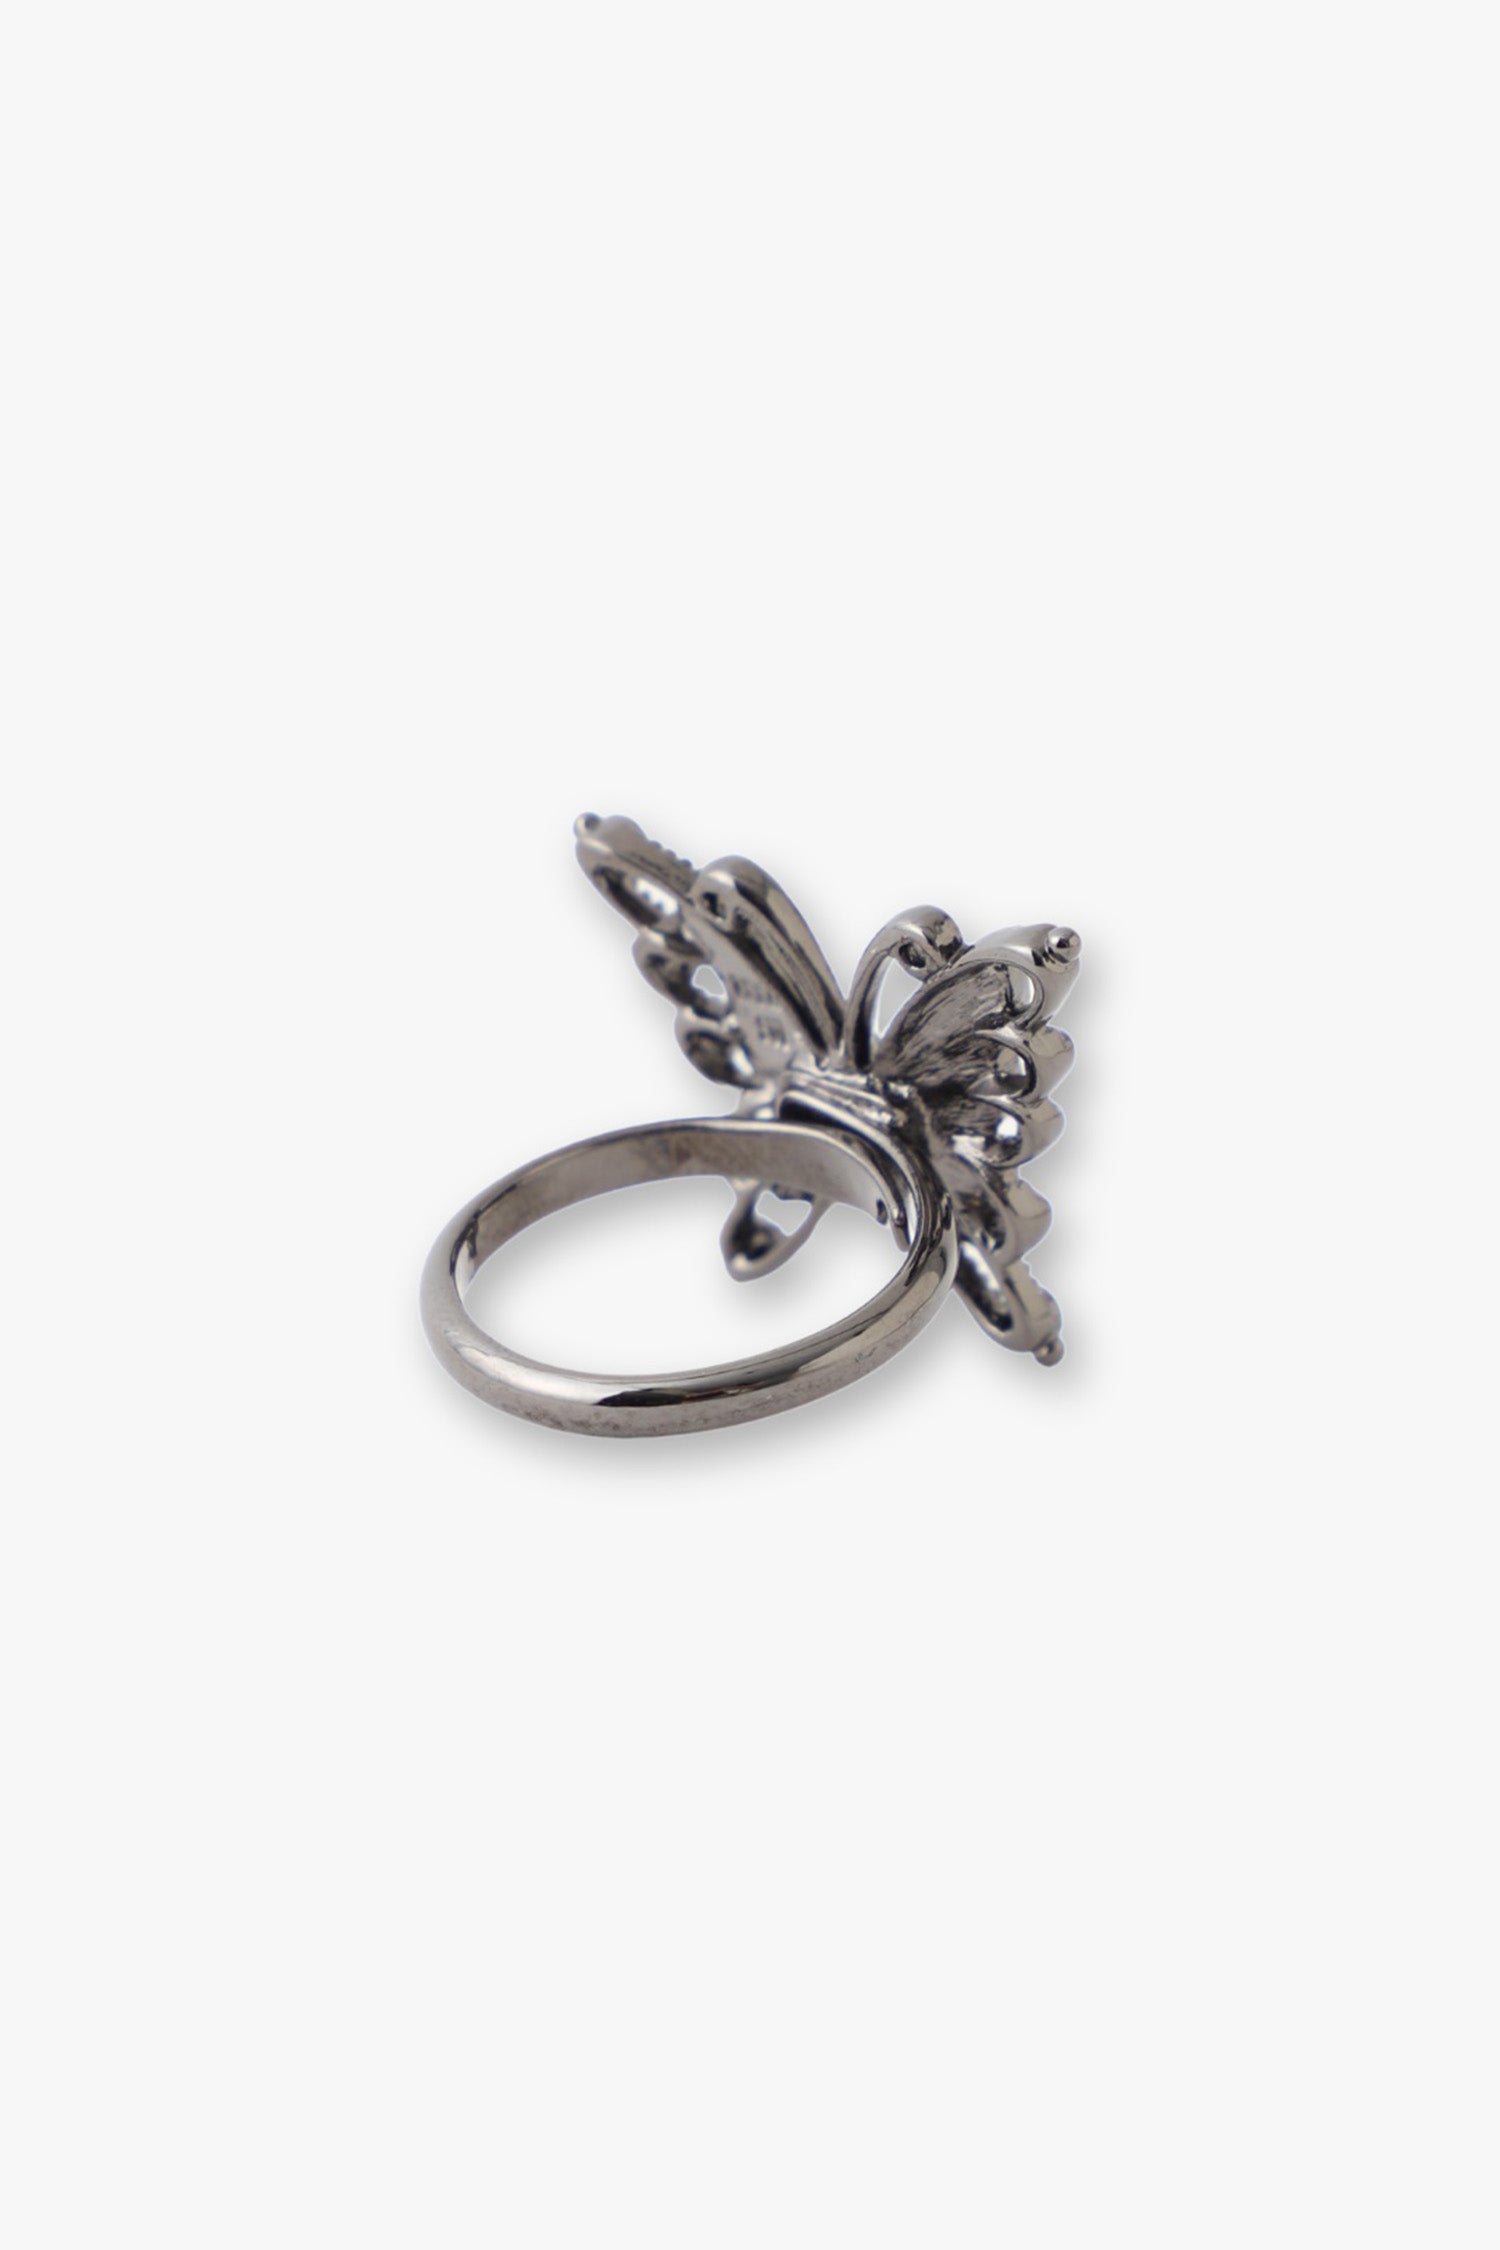 Butterfly Ring, Gunmetal, Adjustable metal ring with purple butterfly embellishment